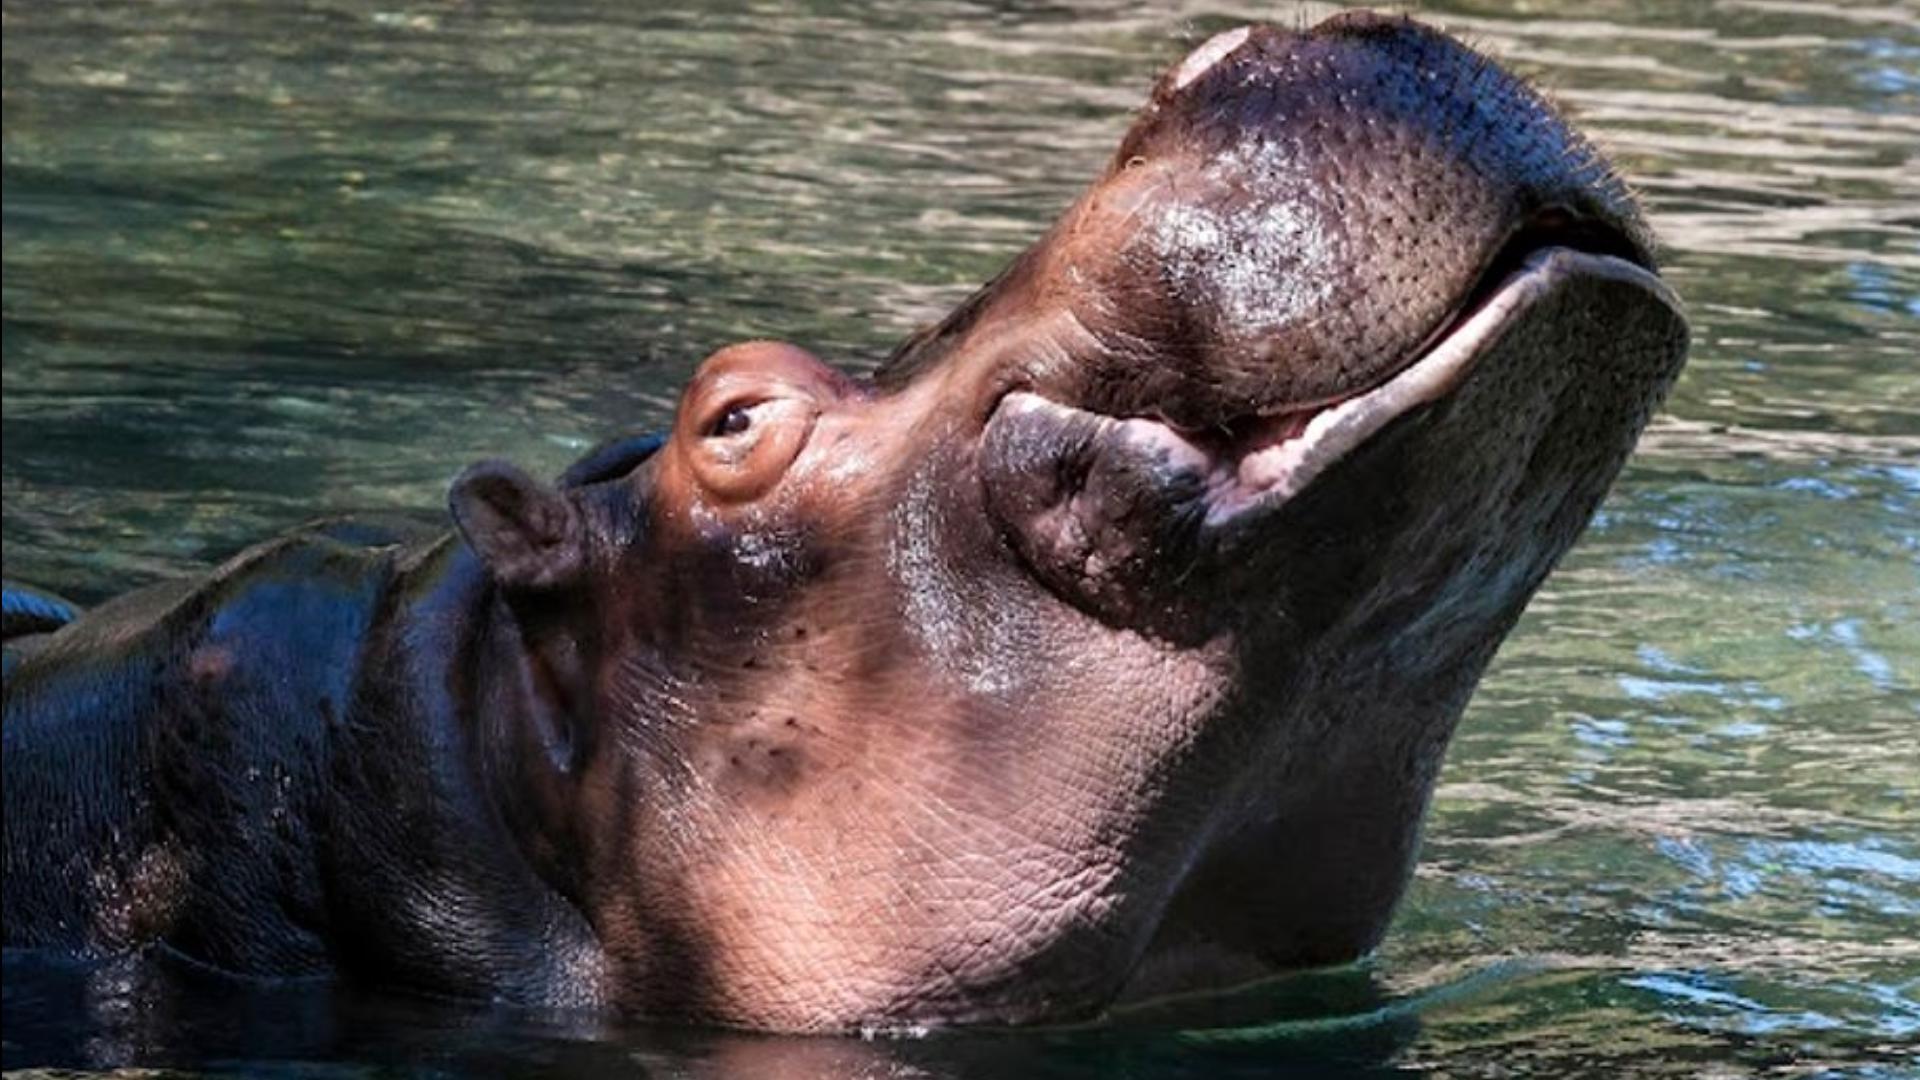 Water Lily, a 45-year-old hippo, was diagnosed with cancer last month.